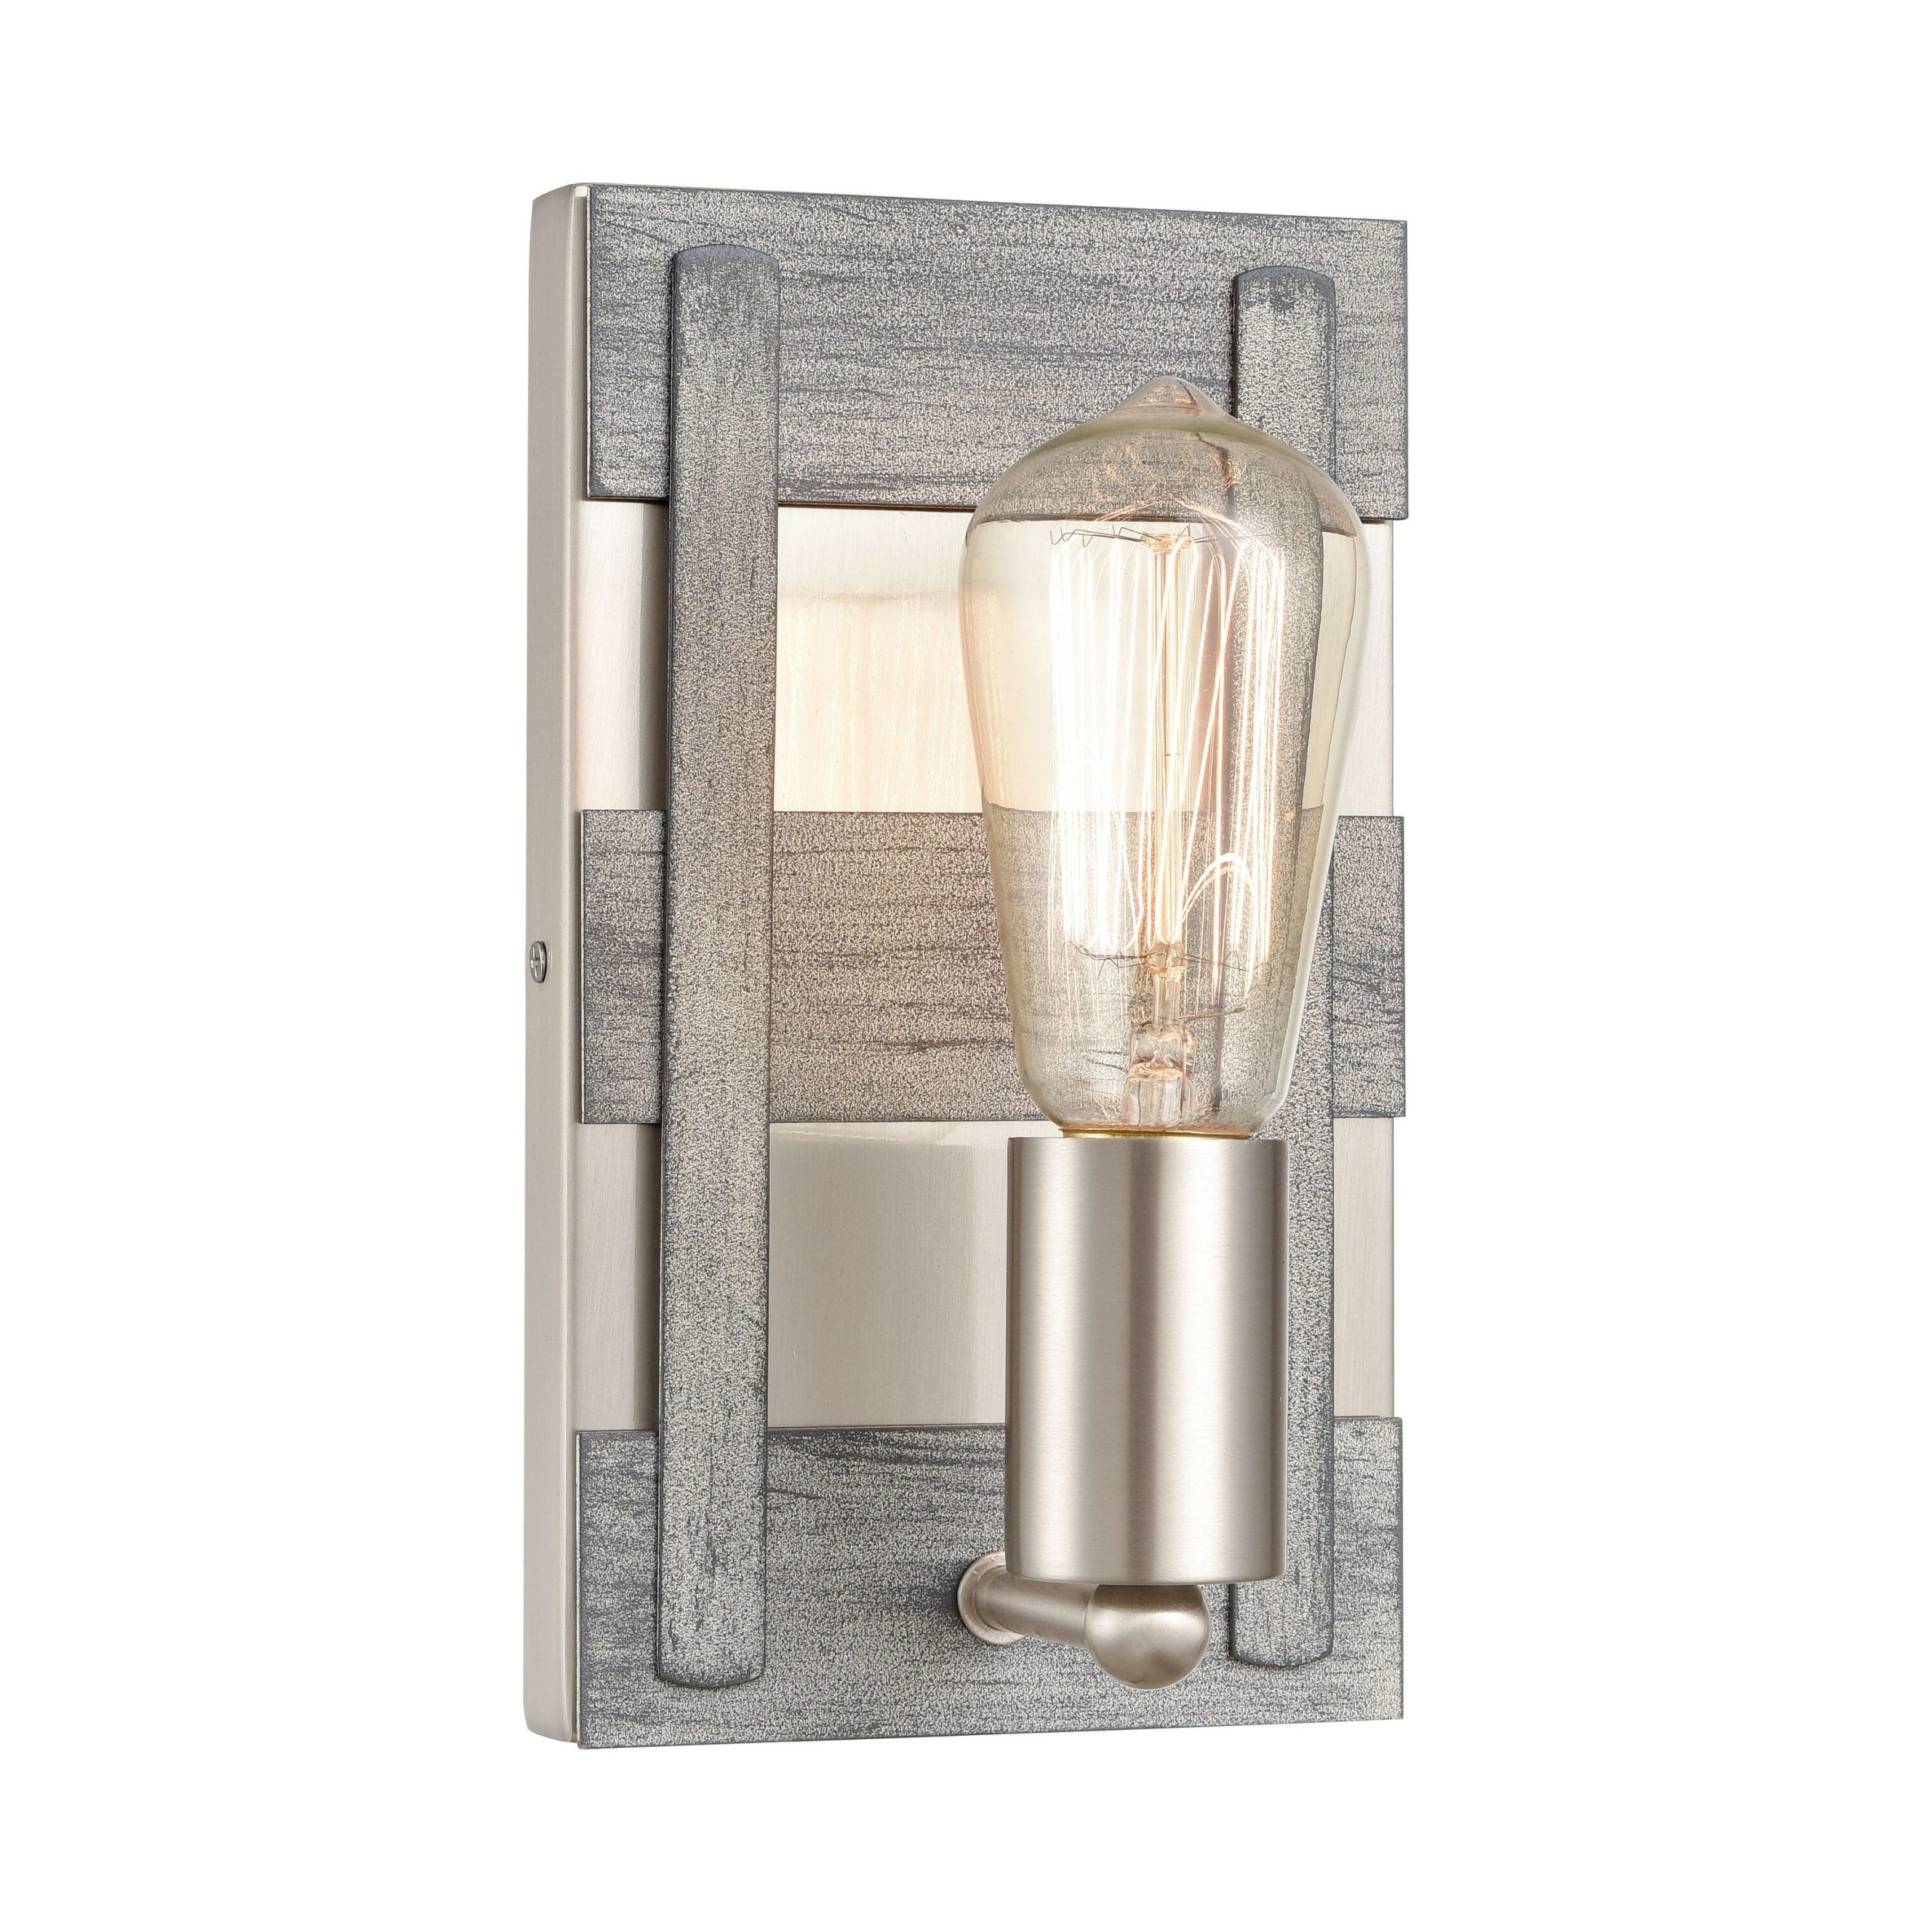 Westmoreelk Lighting Val De Loire 5 In 1 Light Weathered Driftwood Led  Transitional Vanity Light In The Vanity Lights Department At Lowes With Regard To Latest Weathered Driftwood And Gold Lantern Chandeliers (View 7 of 15)